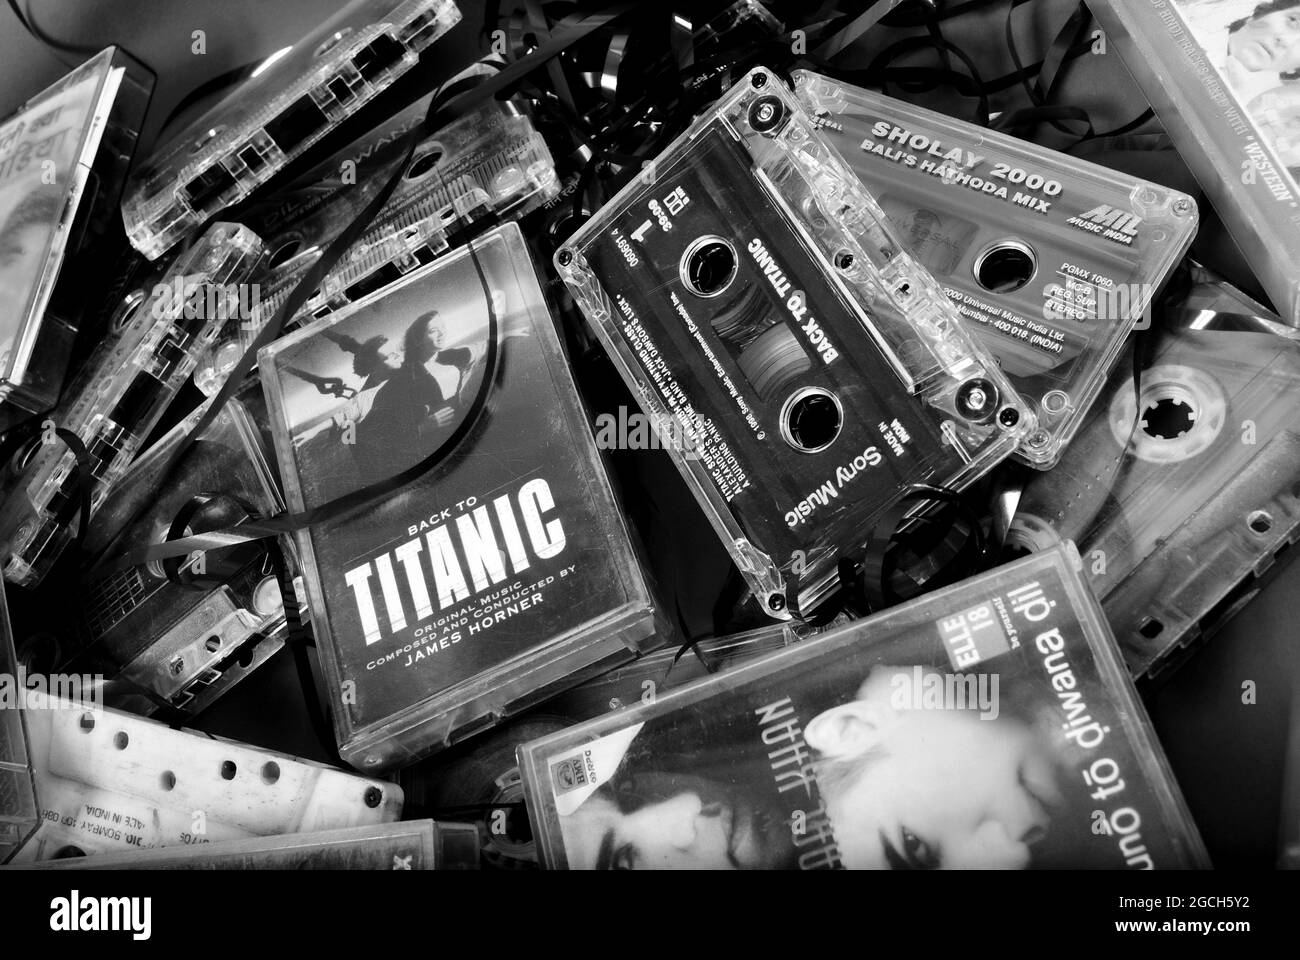 PORBANDAR, INDIA - Jul 16, 2016: A grayscale picture of a few Cassette tapes of popular movies and music Stock Photo